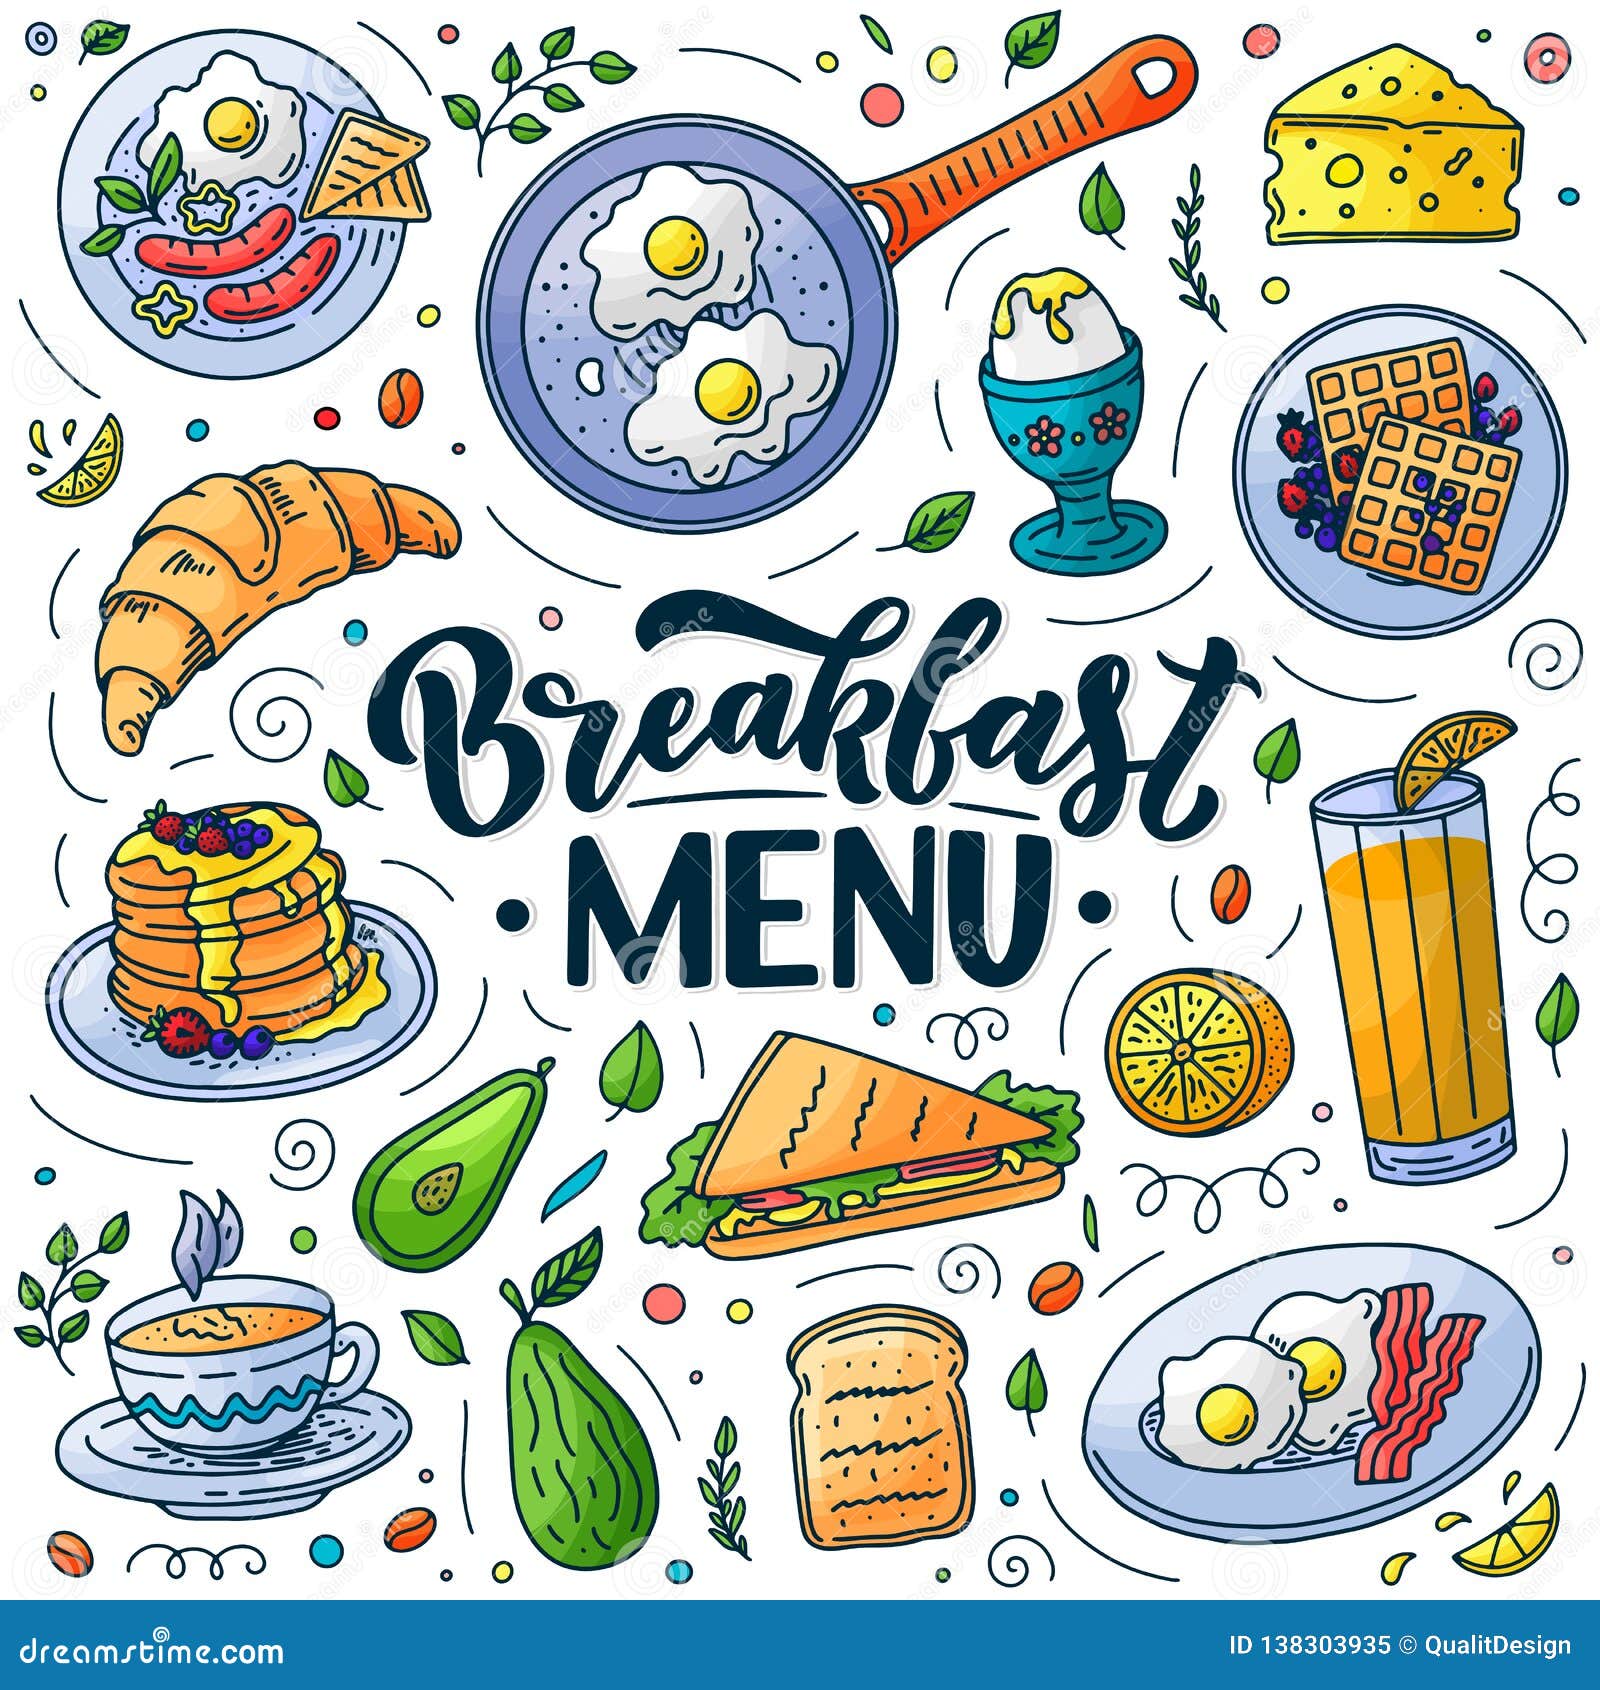 breakfast menu  s.  doodle . calligraphy lettering and traditional breakfast meal